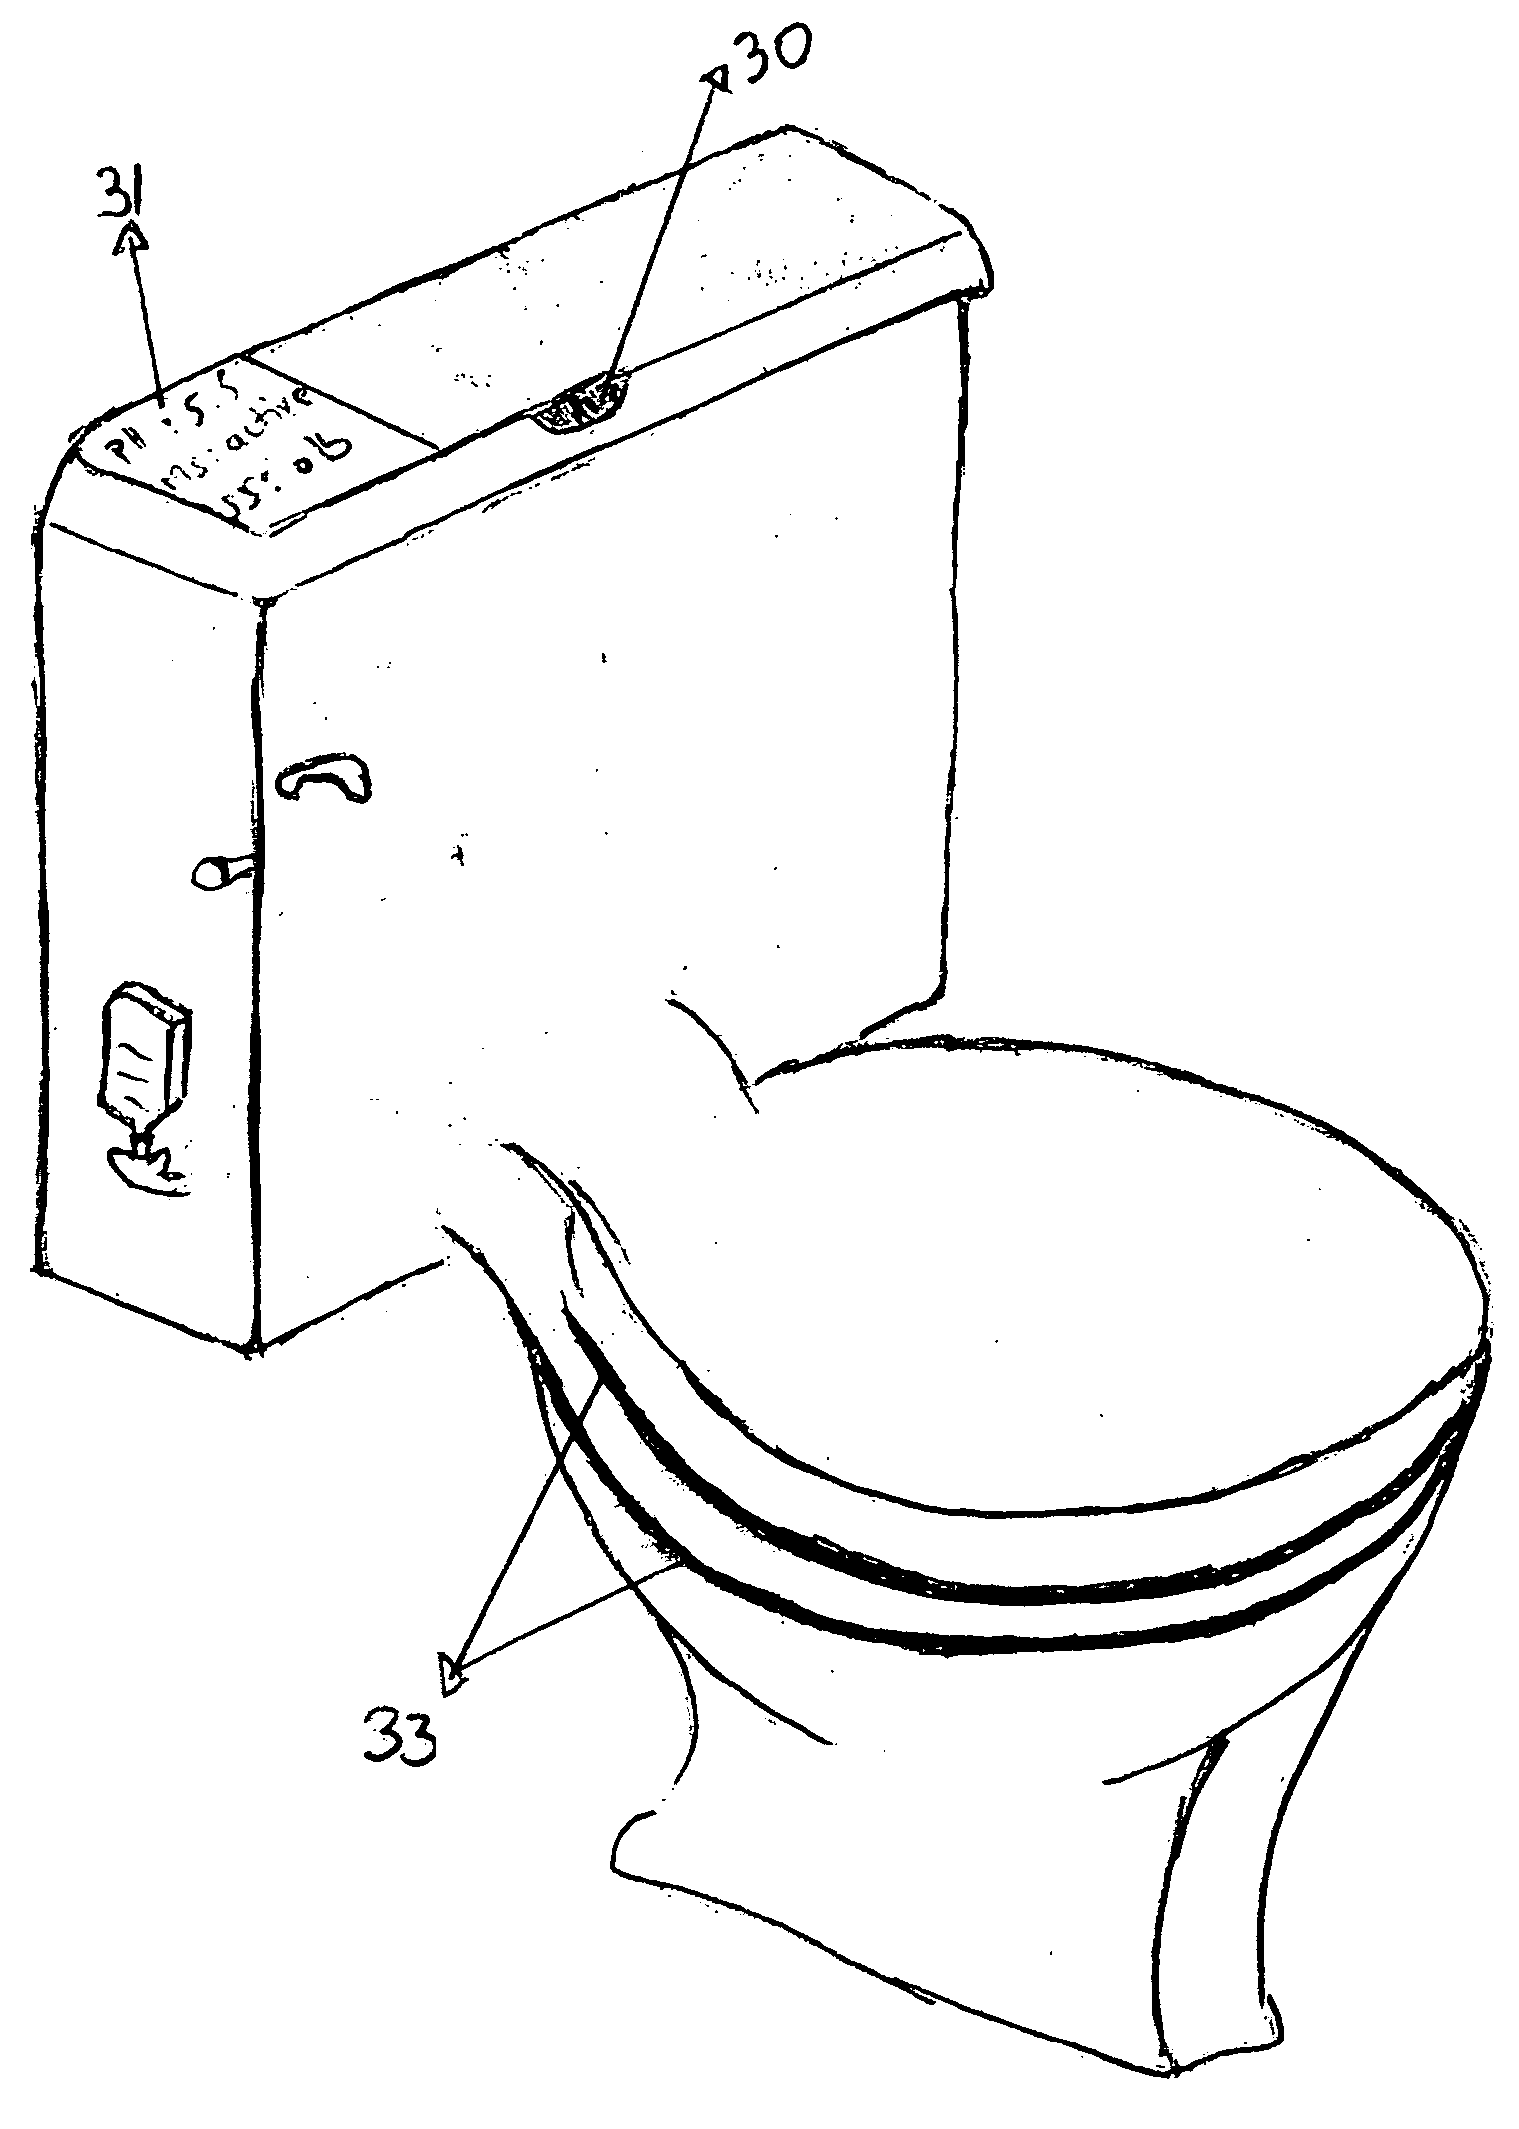 Self-cleaning toilet with an optional self flushing system